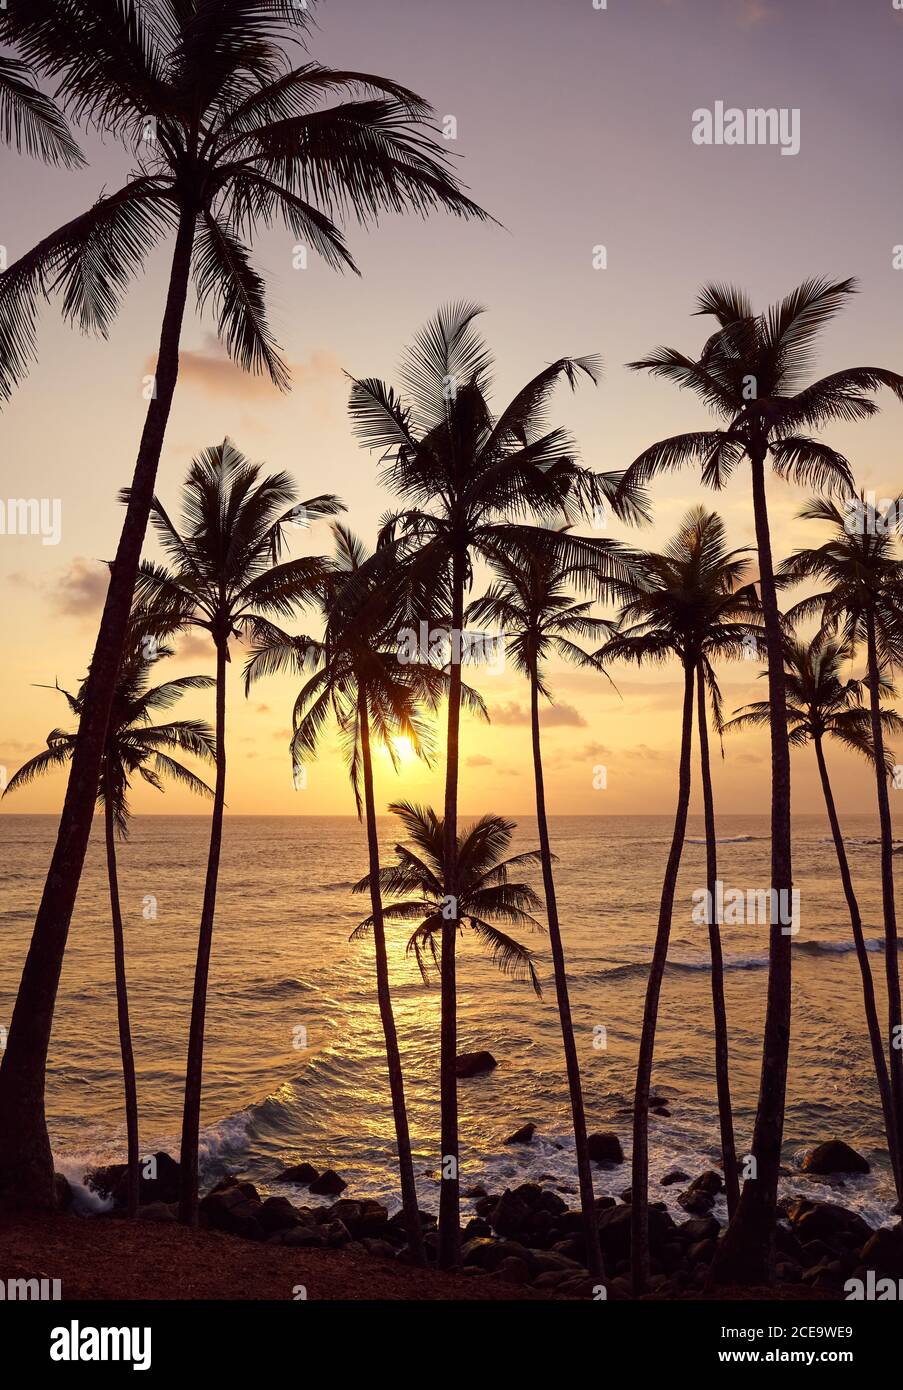 Beautiful tropical sunset with coconut palm trees silhouettes. Stock Photo